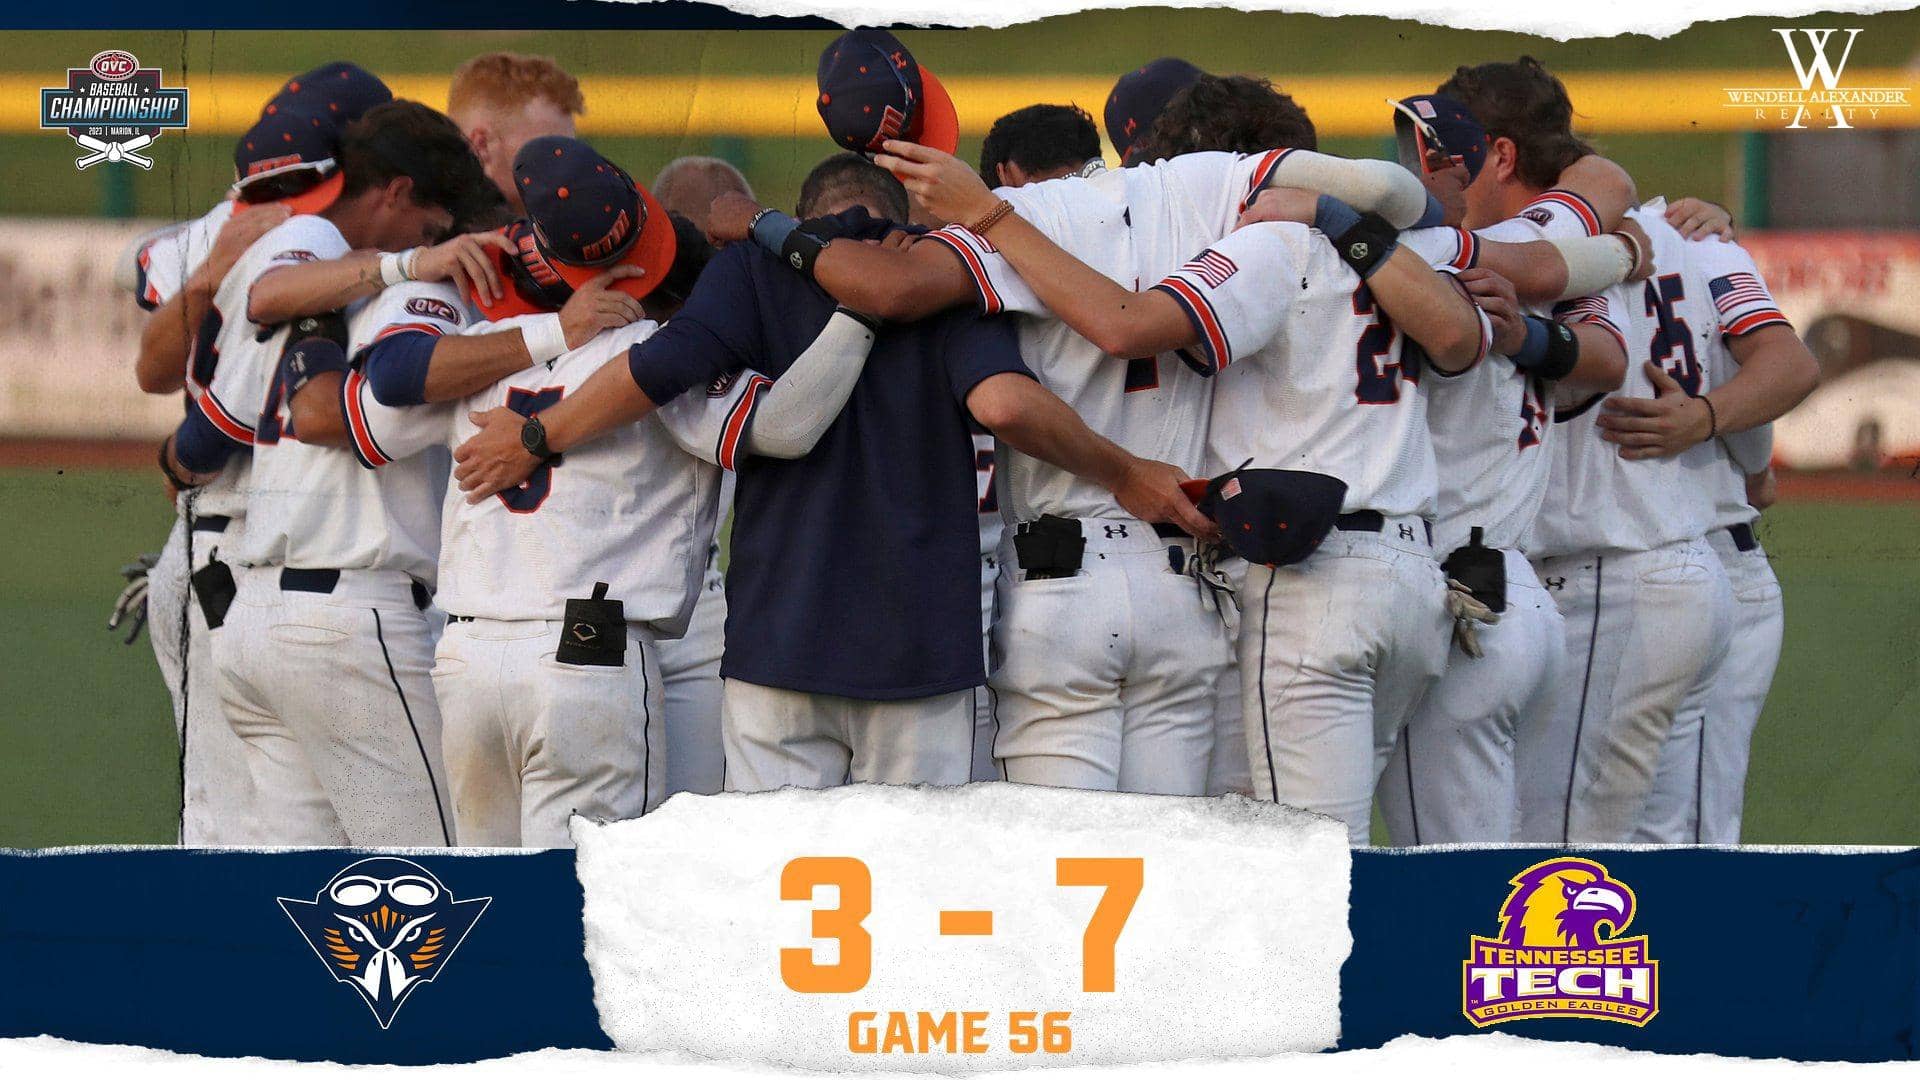 UT Martin Baseball's Season Comes To An End With 73 Loss to Tennessee